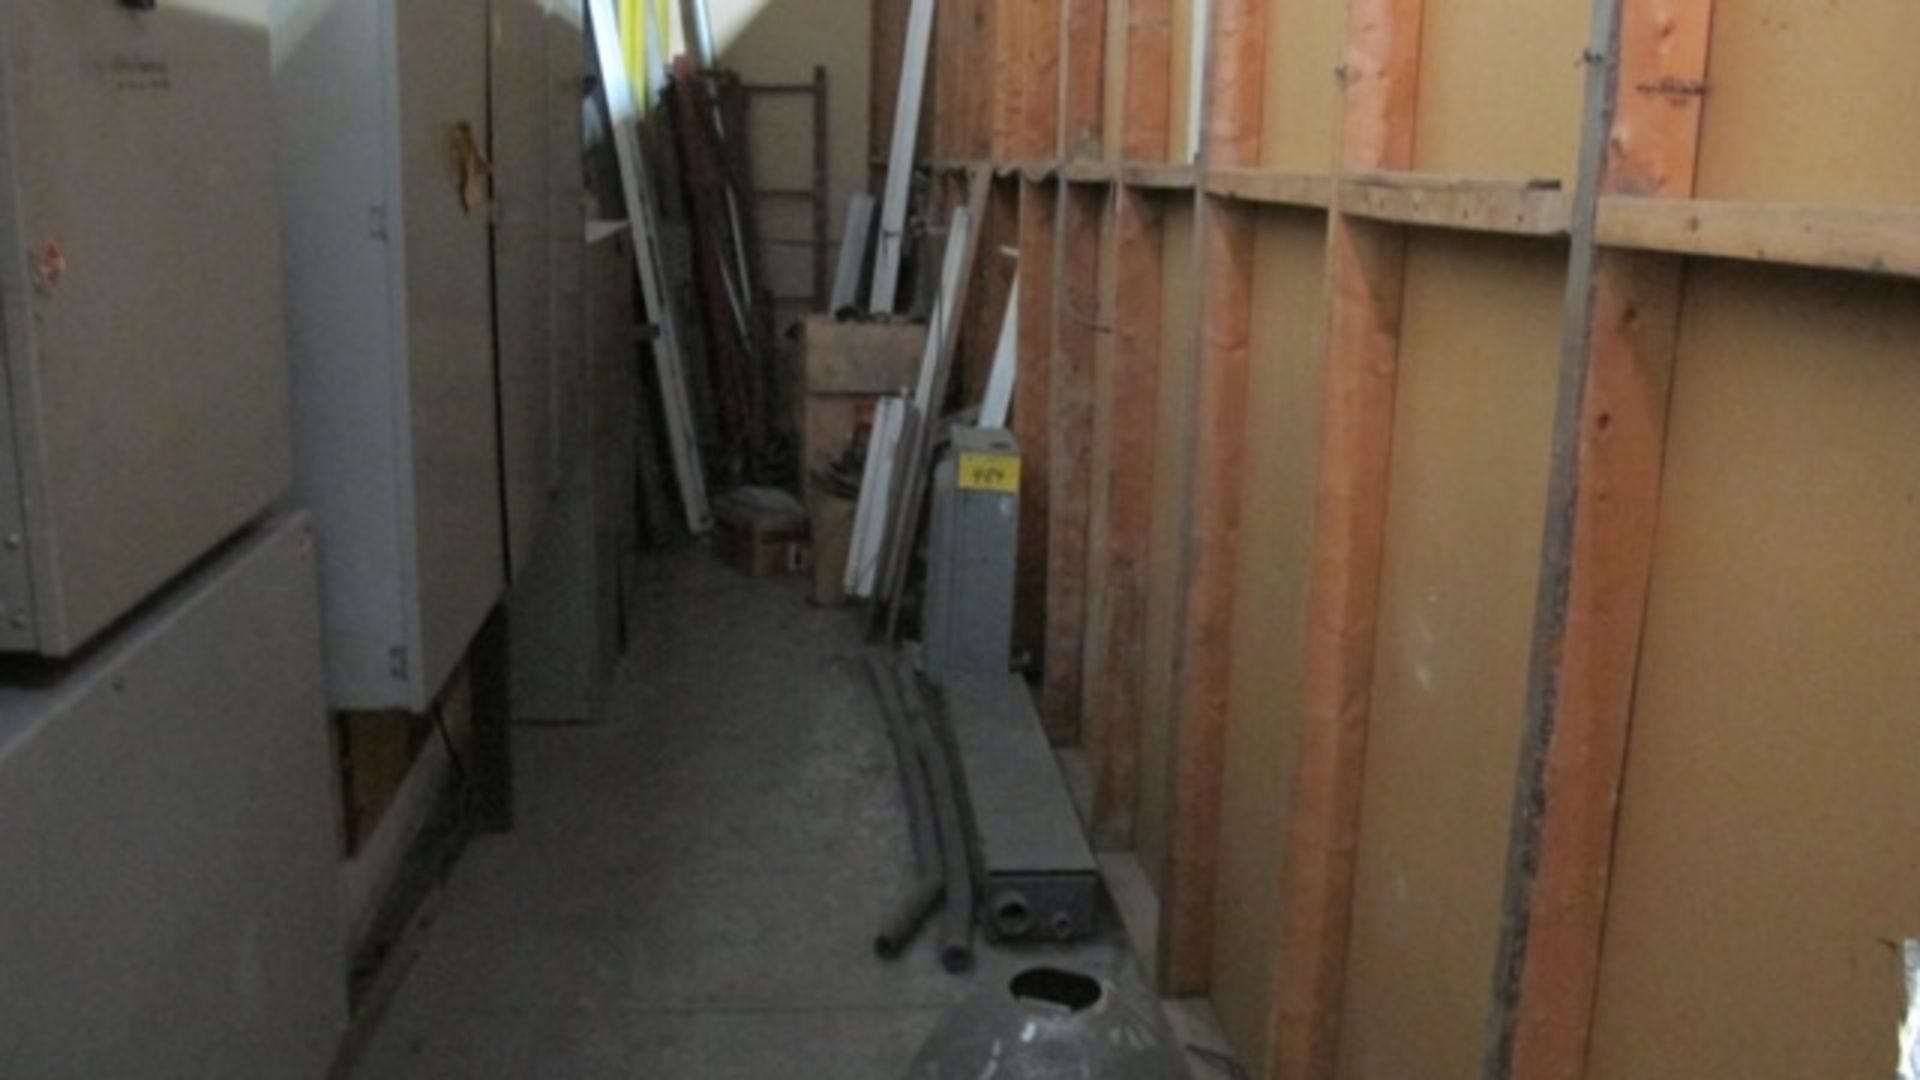 LOT OF 2 PARTS CABINETS, SHELVING UNITS W/PARTS, PALLET OF 5 METAL BINS, LOOSE CONTENTS OF SWITCHING - Image 3 of 3